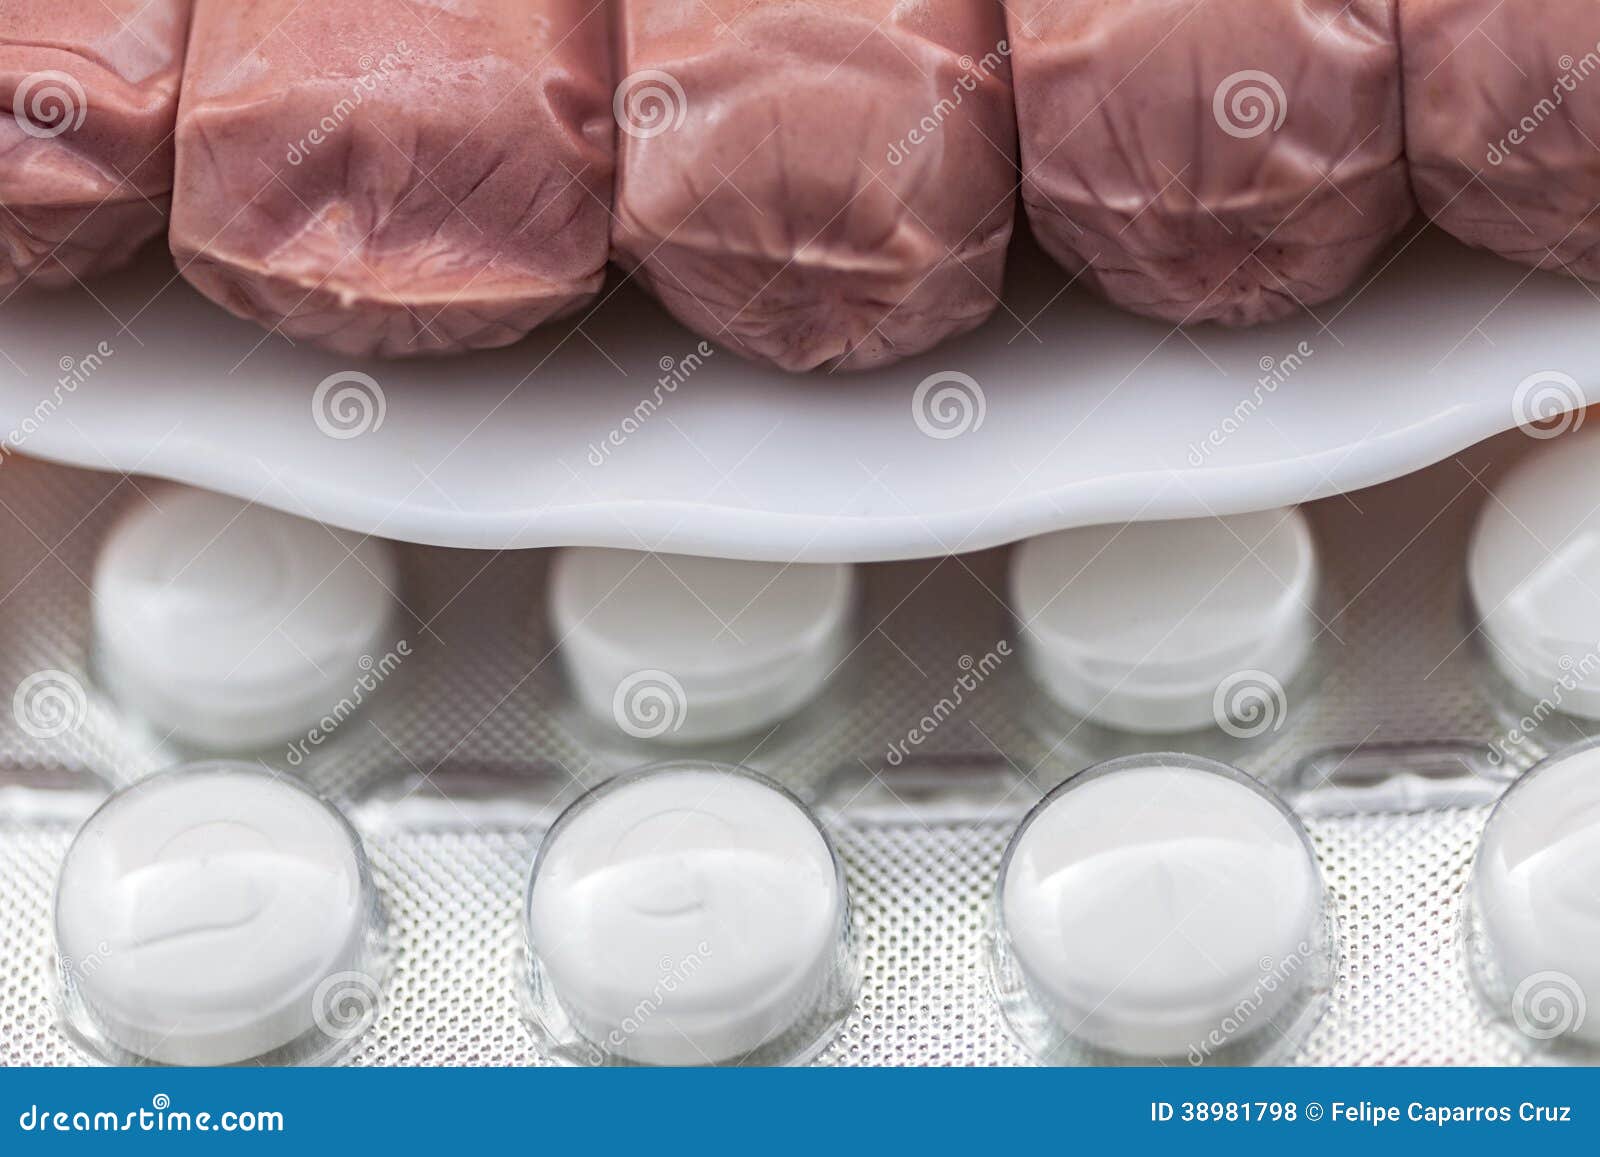 sausages on a plate along with diet pills